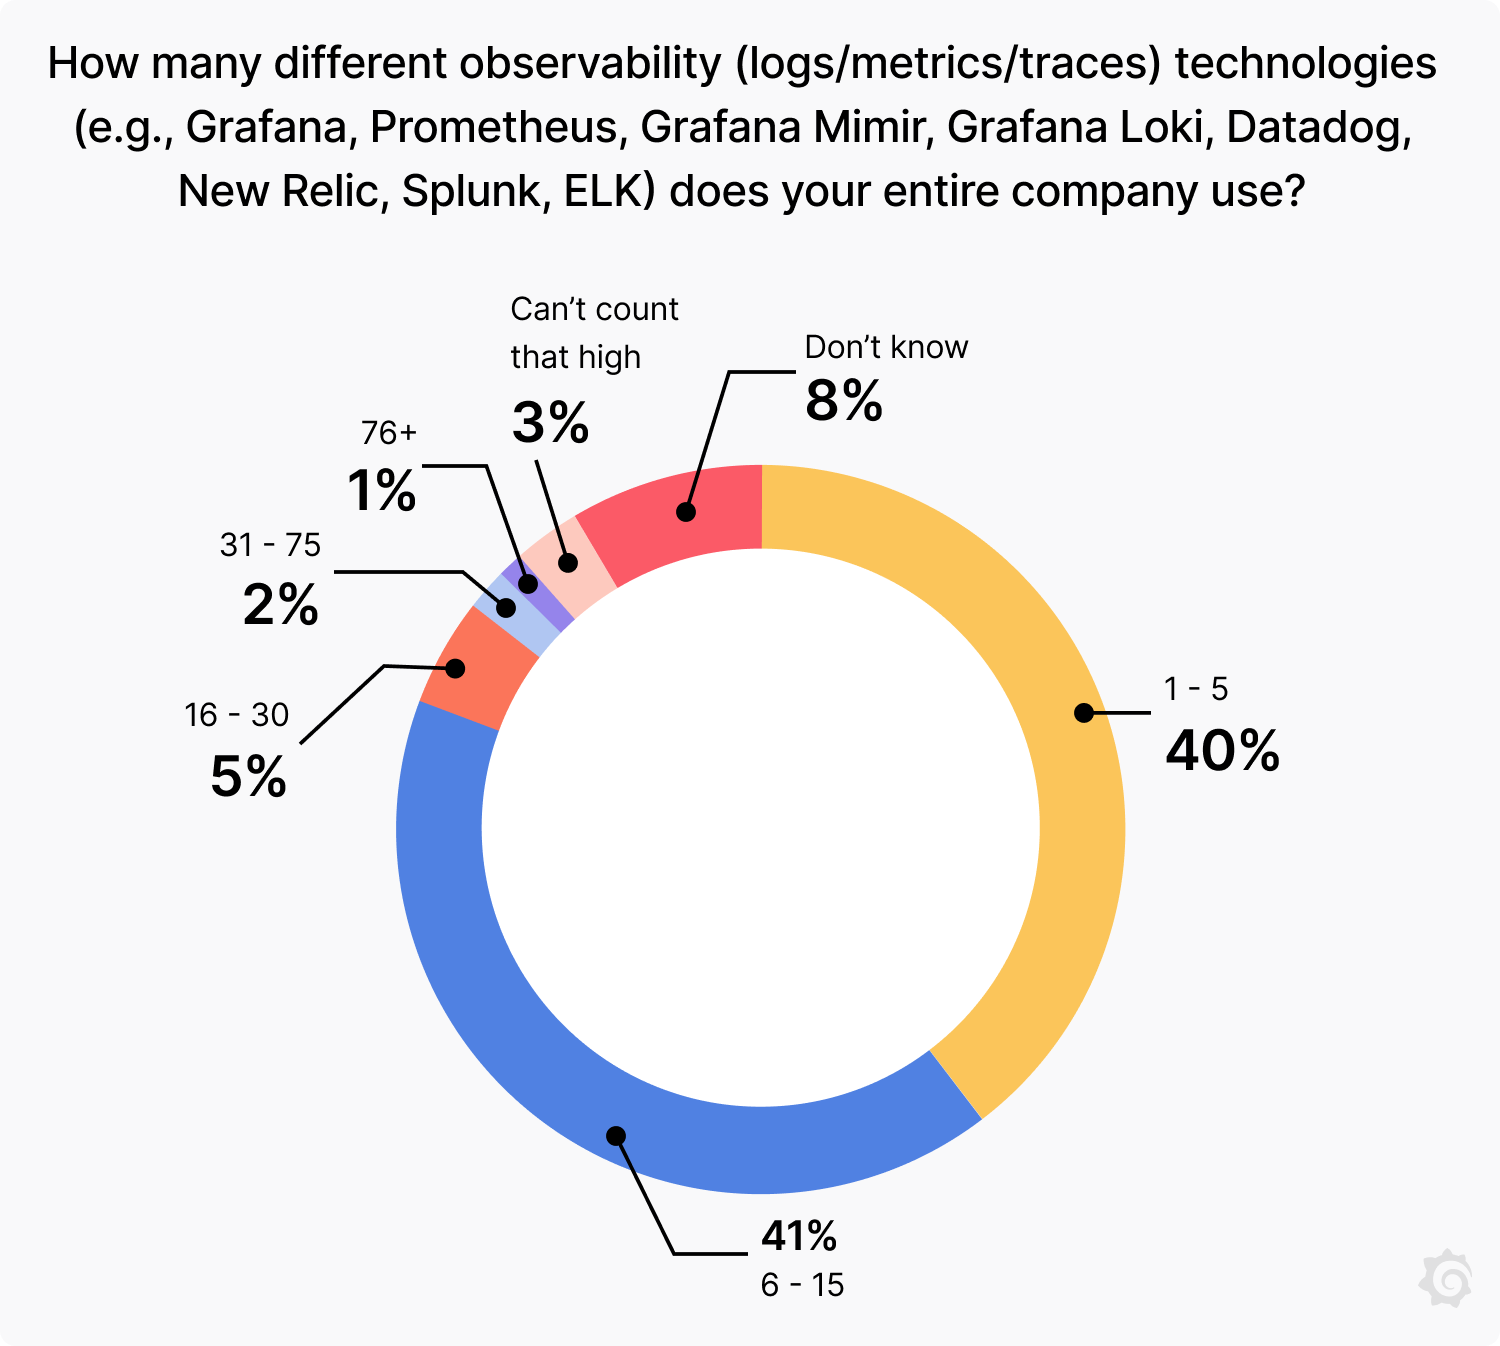 how many technologies does your company use